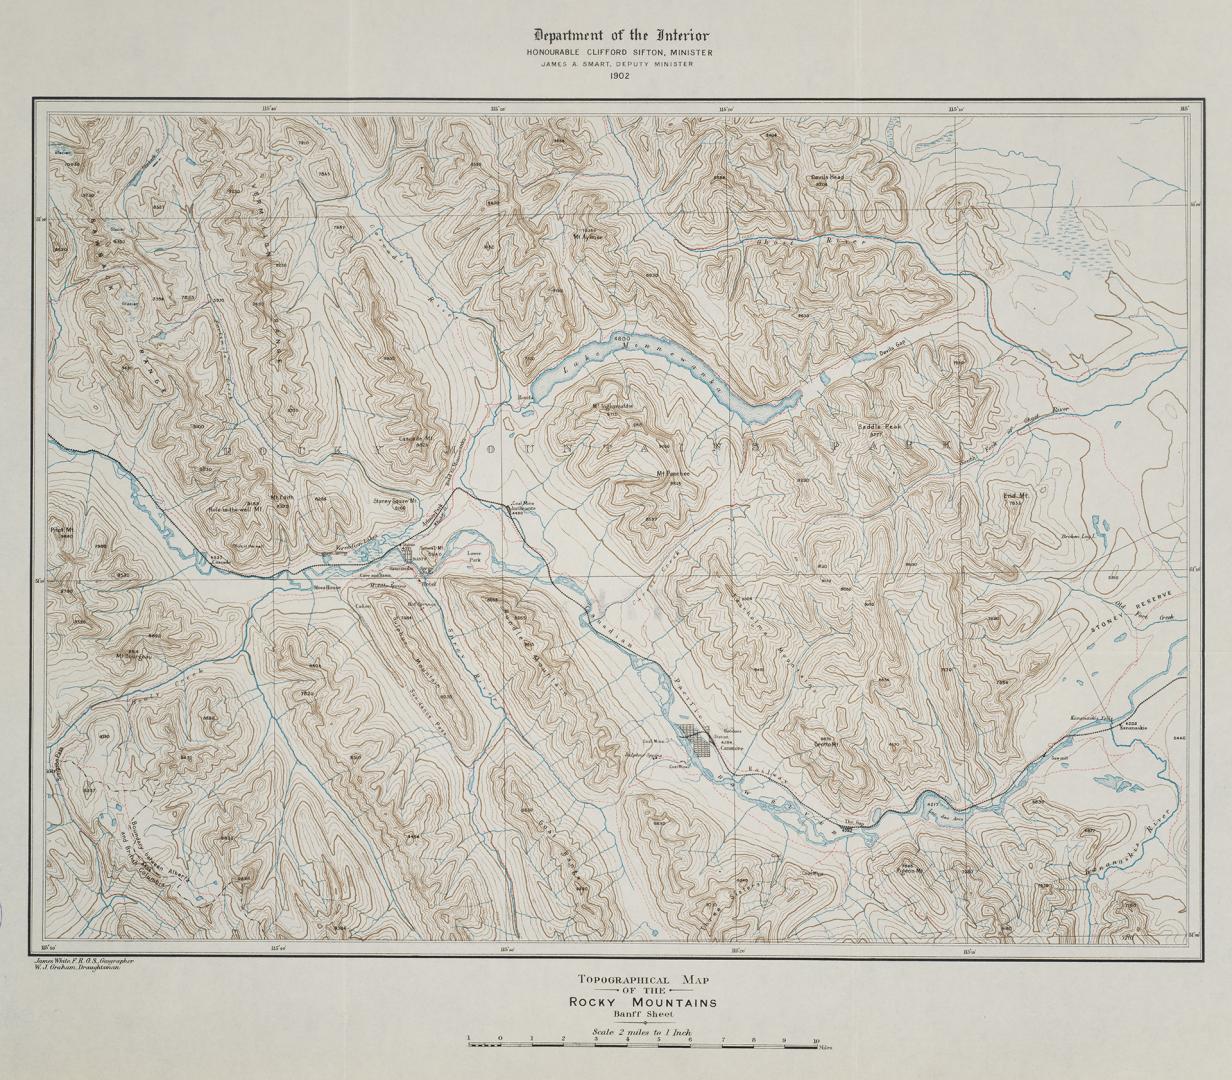 Topographical map of the Rocky Mountains Banff sheet